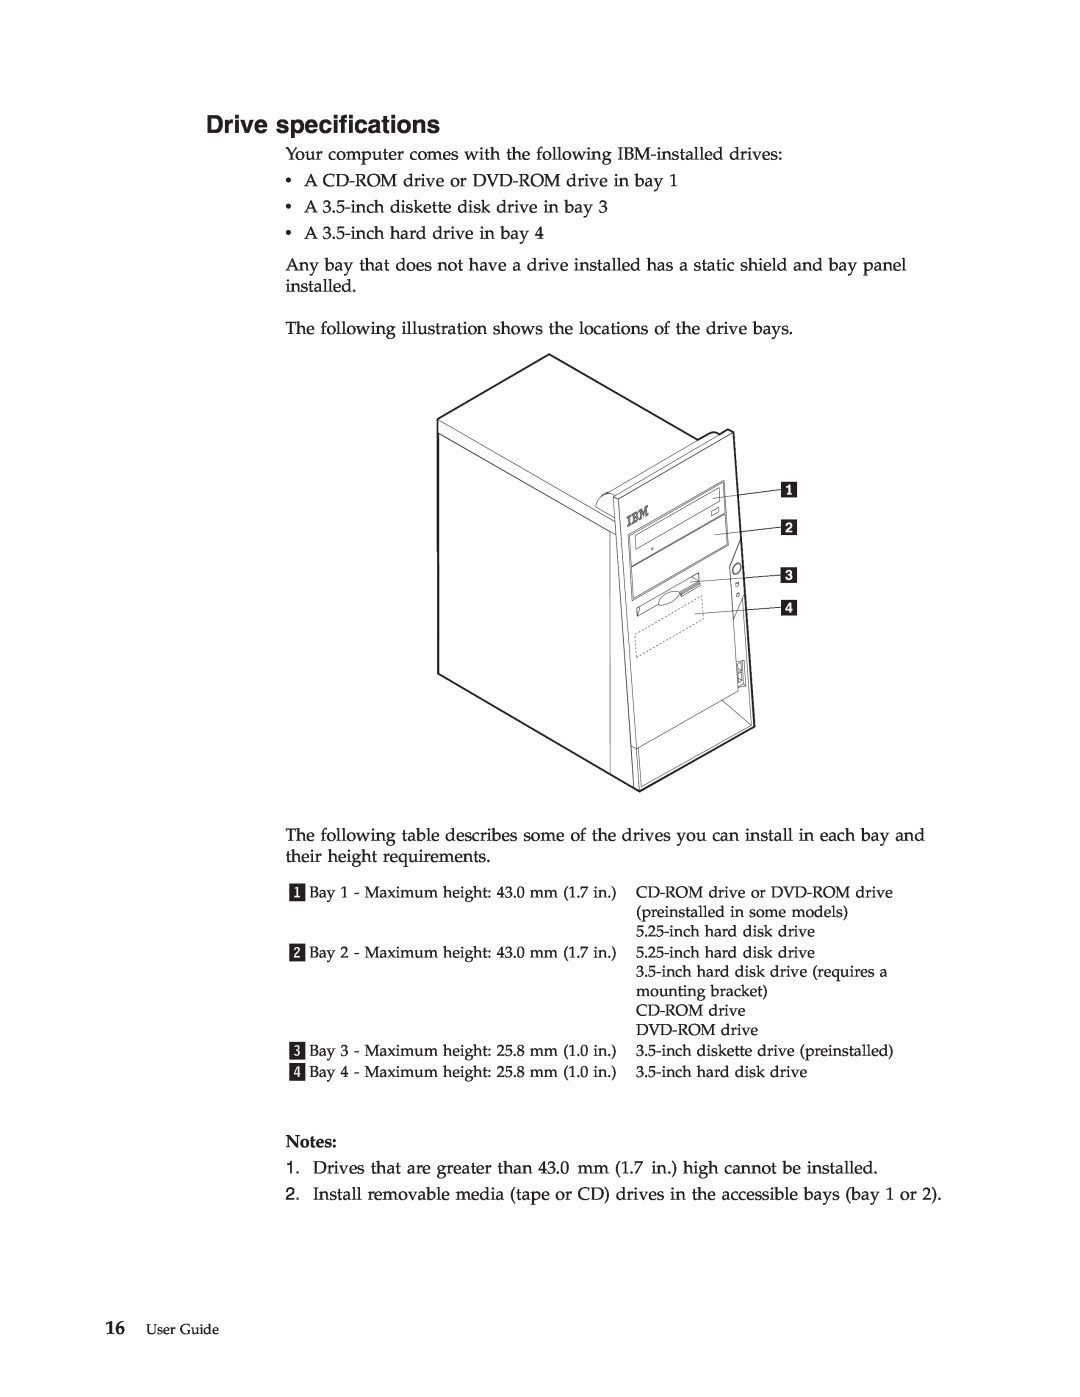 IBM 6824, 2289 manual Drive specifications 